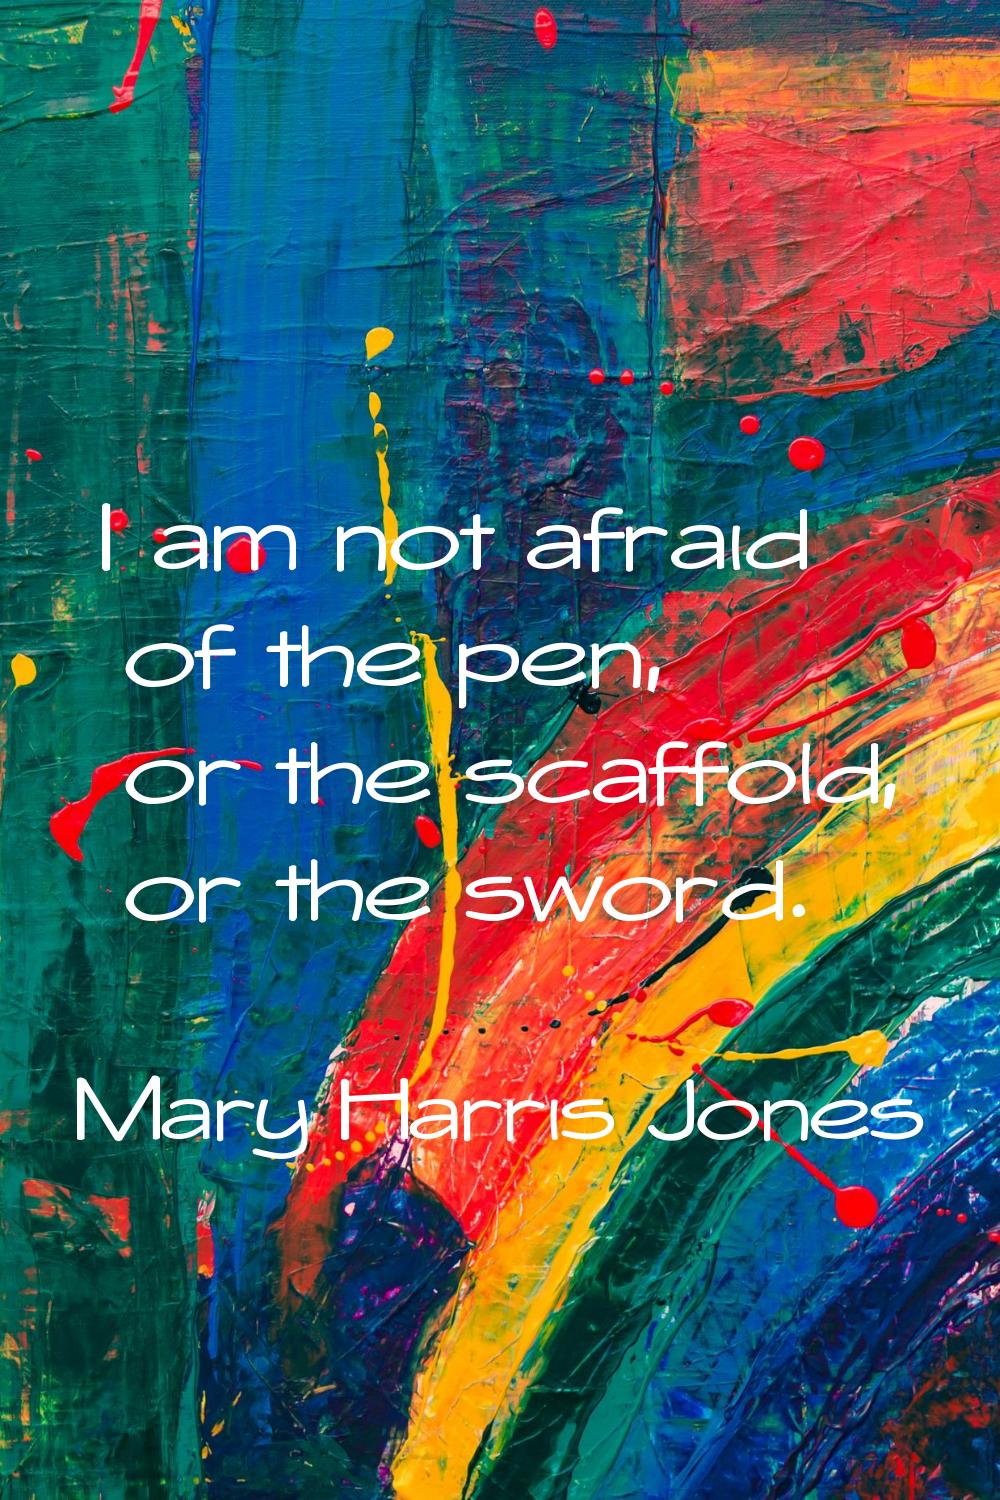 I am not afraid of the pen, or the scaffold, or the sword.